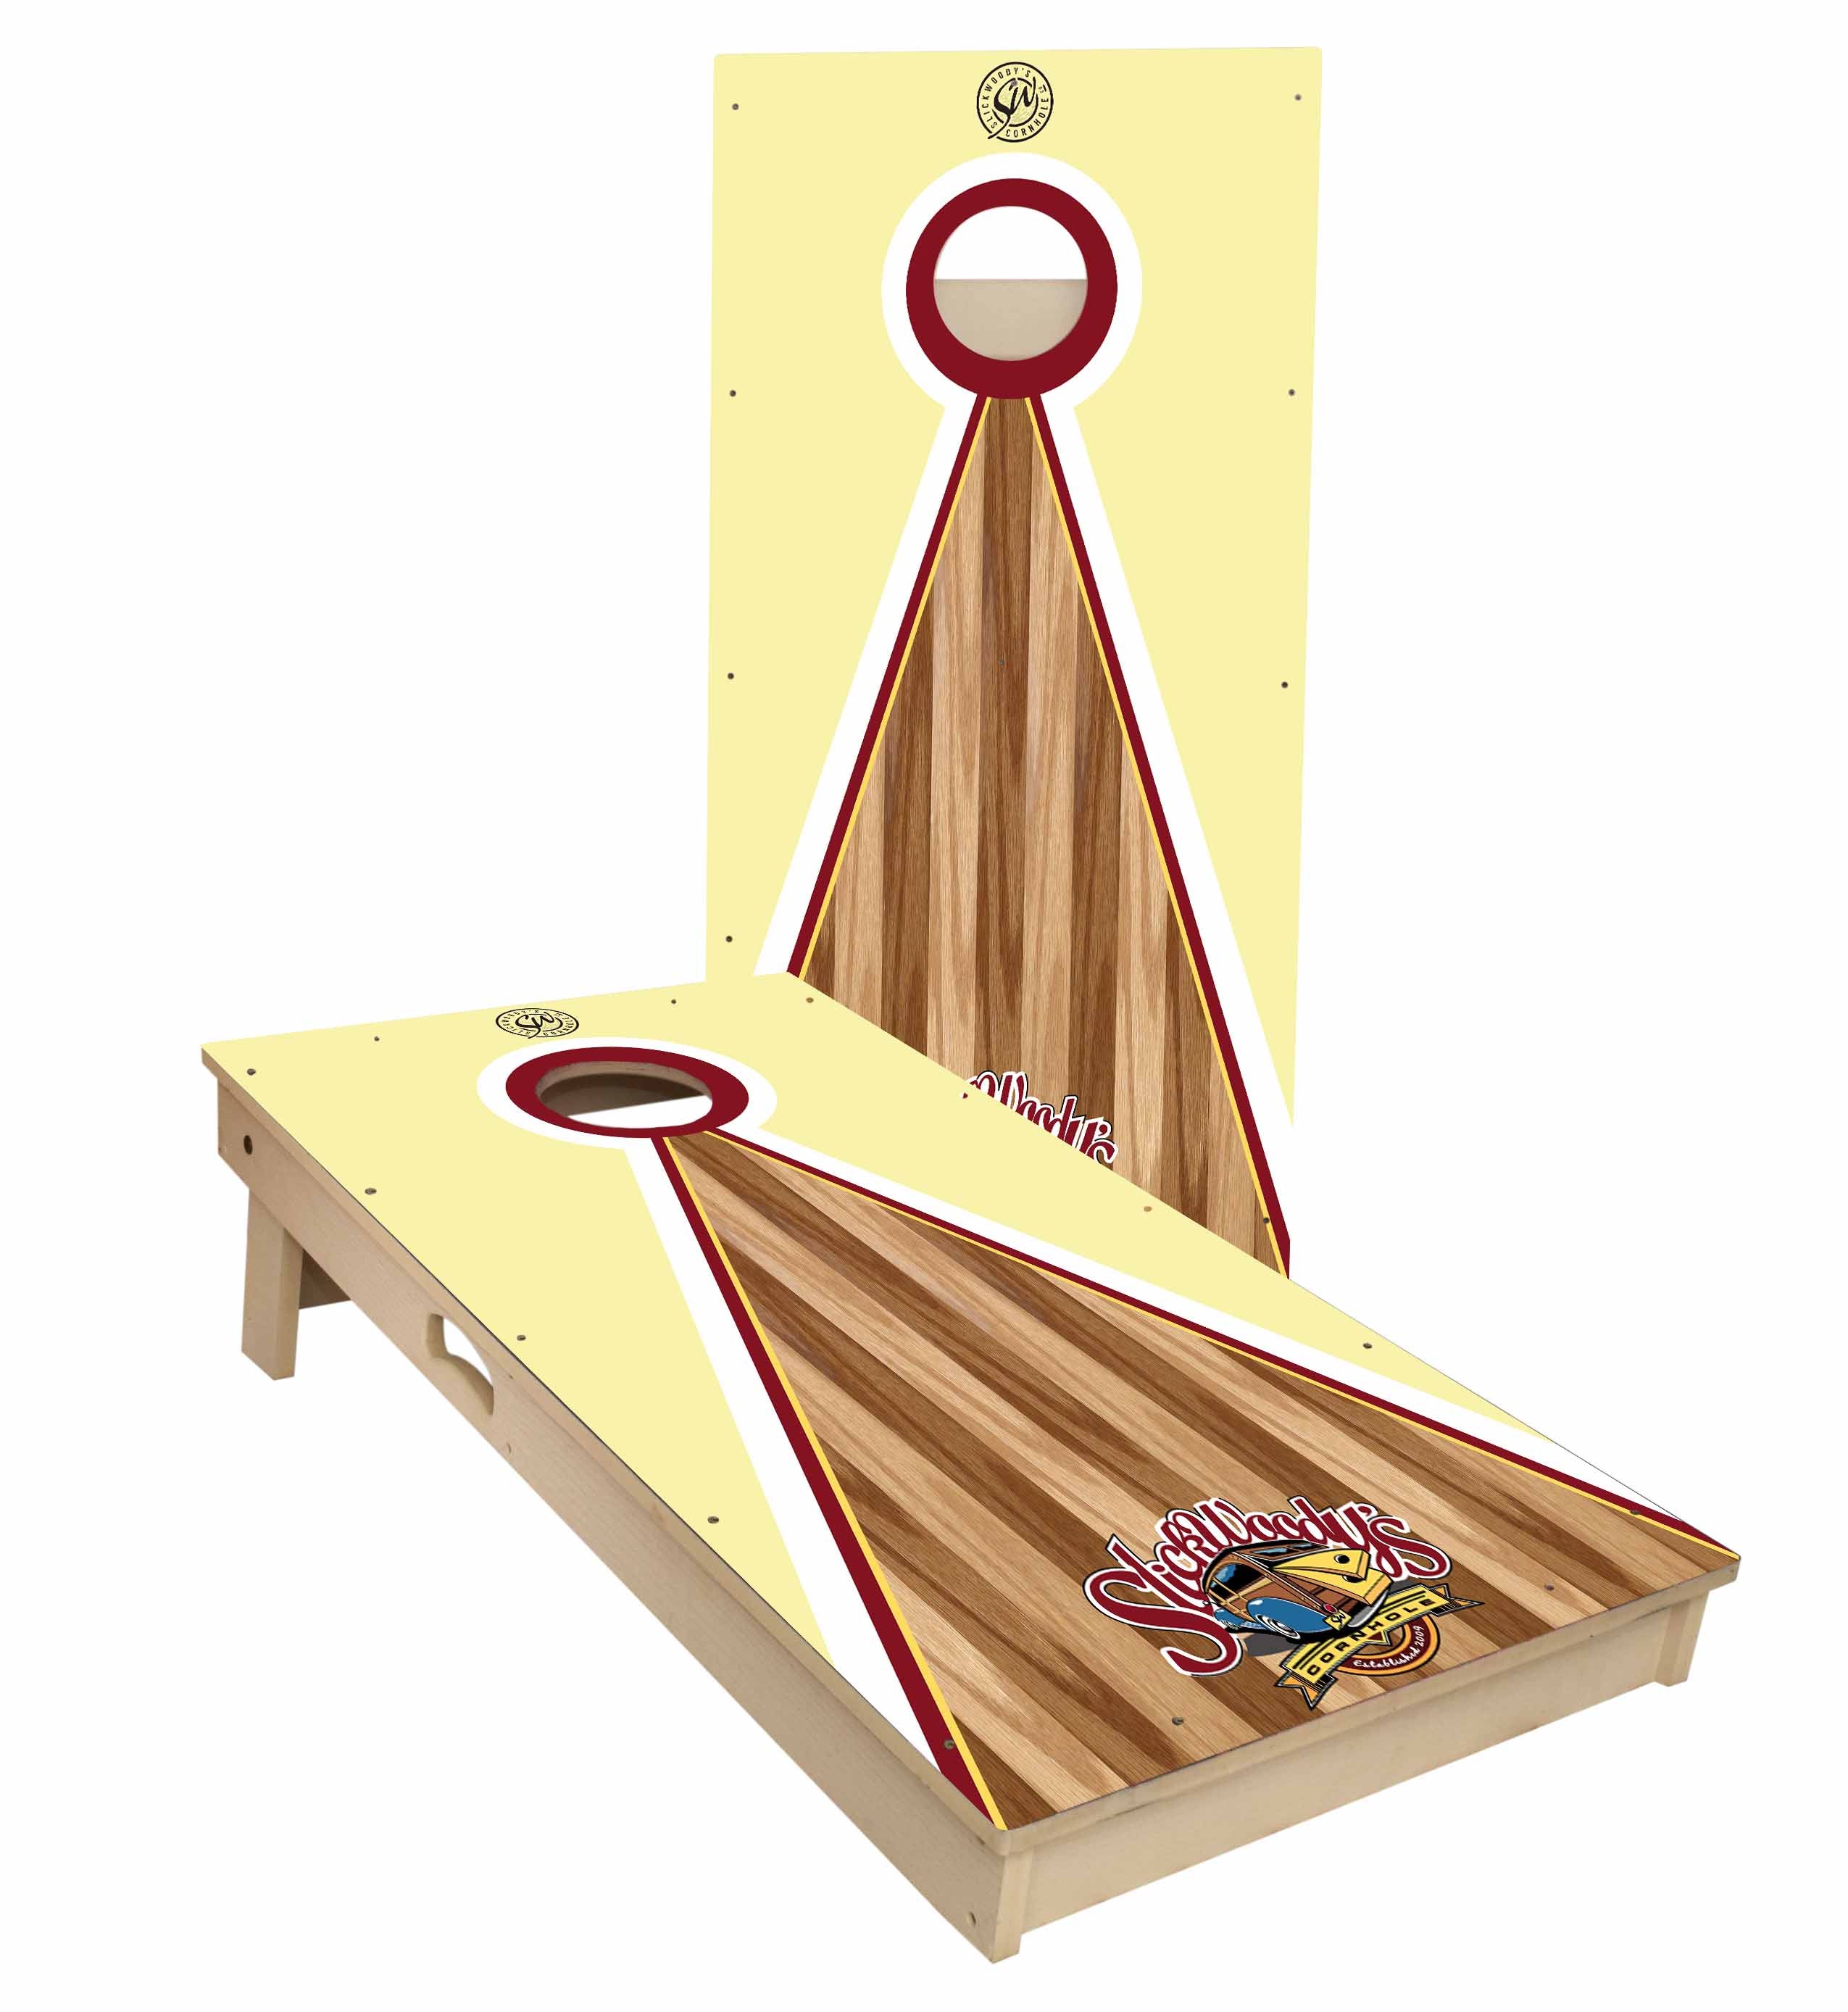 How to Make Cornhole Boards Slick: Easy Techniques for Smooth Gameplay